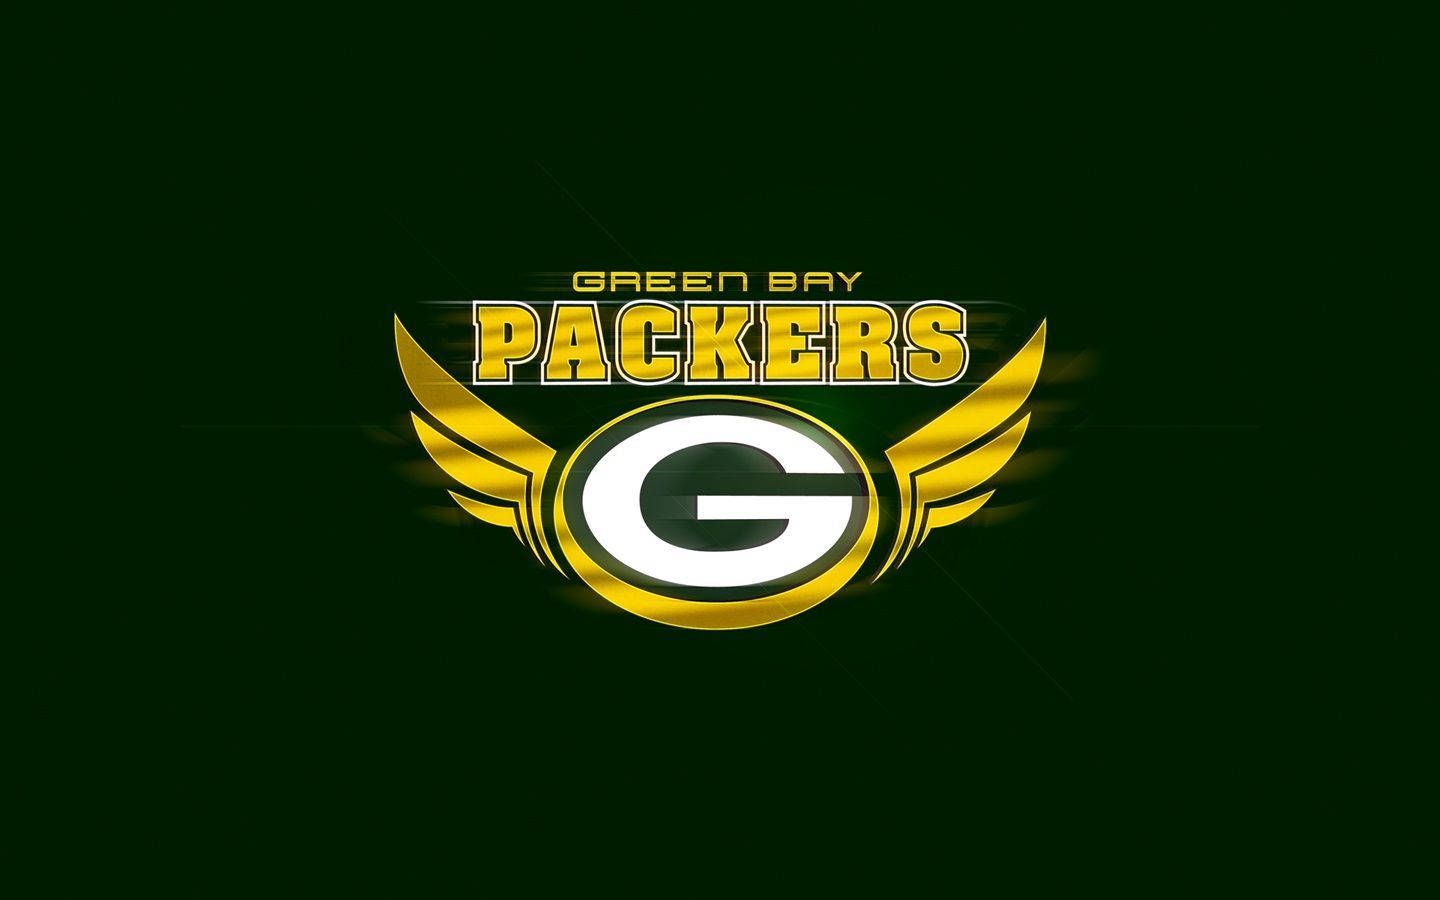 Green Bay Packers Winged Logo Background